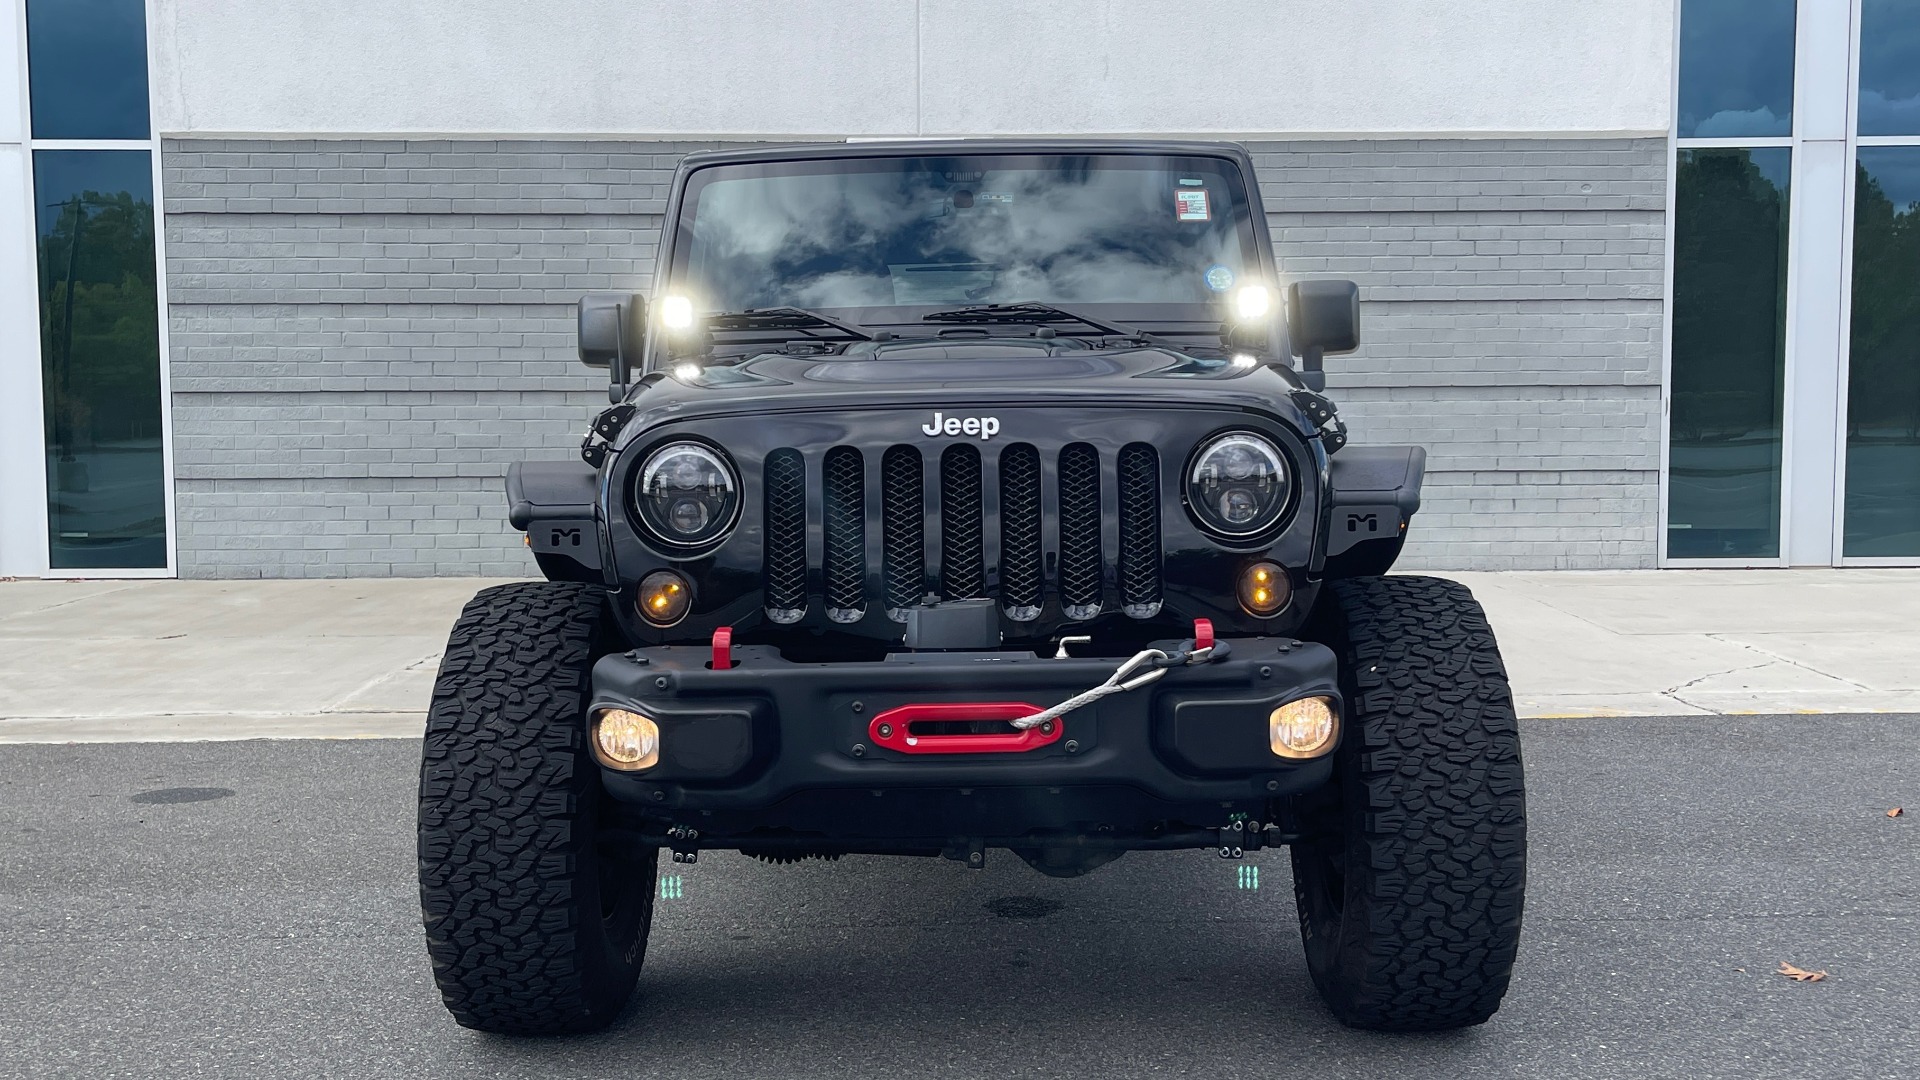 Used 2015 Jeep WRANGLER UNLIMITED RUBICON HARD ROCK 4X4 / 3.6L / 5-SPD AUTO / FREEDOM TOP for sale Sold at Formula Imports in Charlotte NC 28227 15